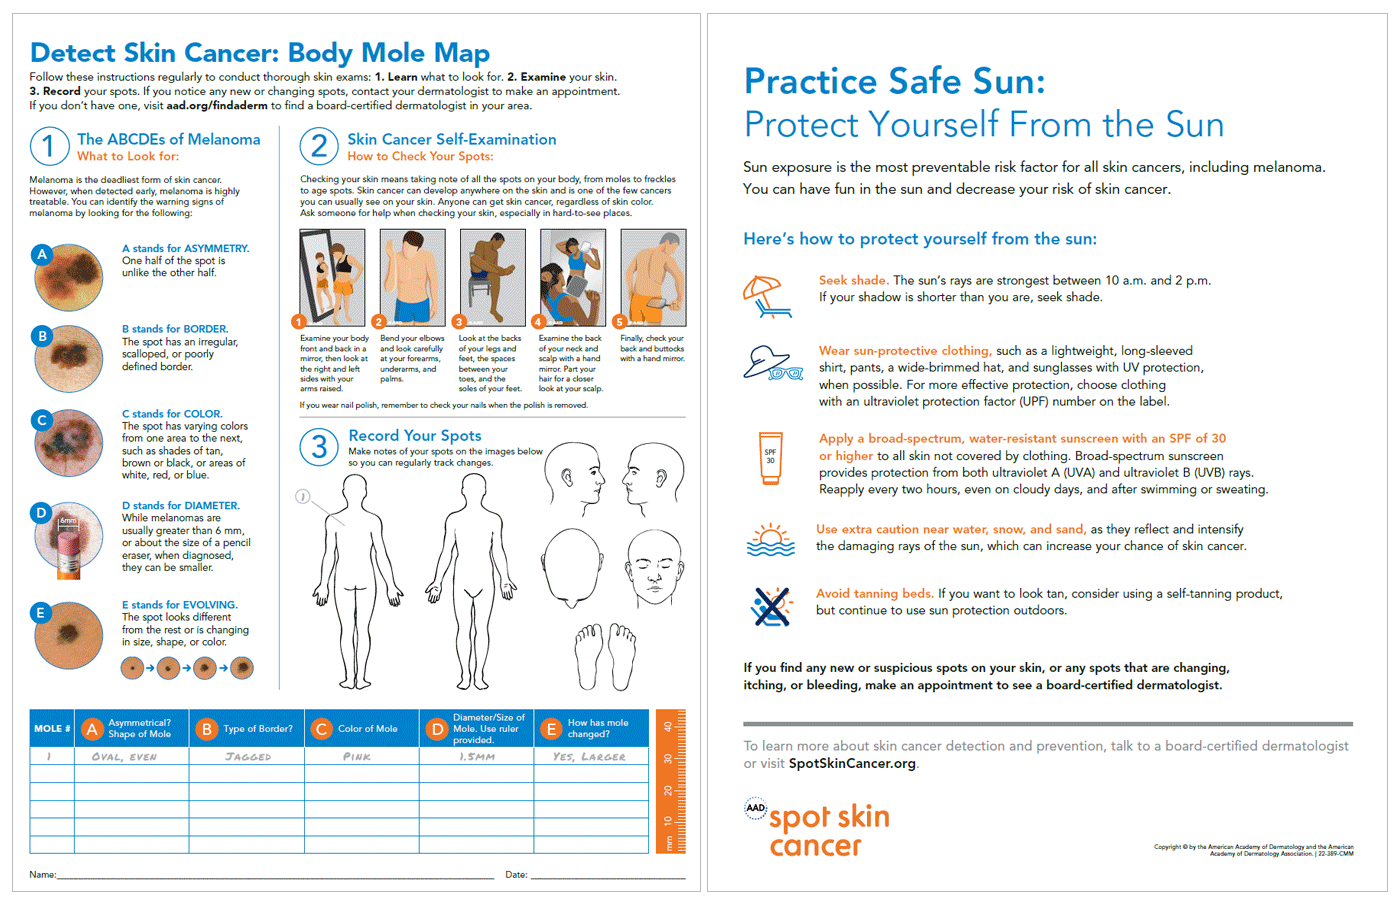 Use the AAD's body mole map infographic to keep track of the spots on your skin and make note of any changes from year-to-year.